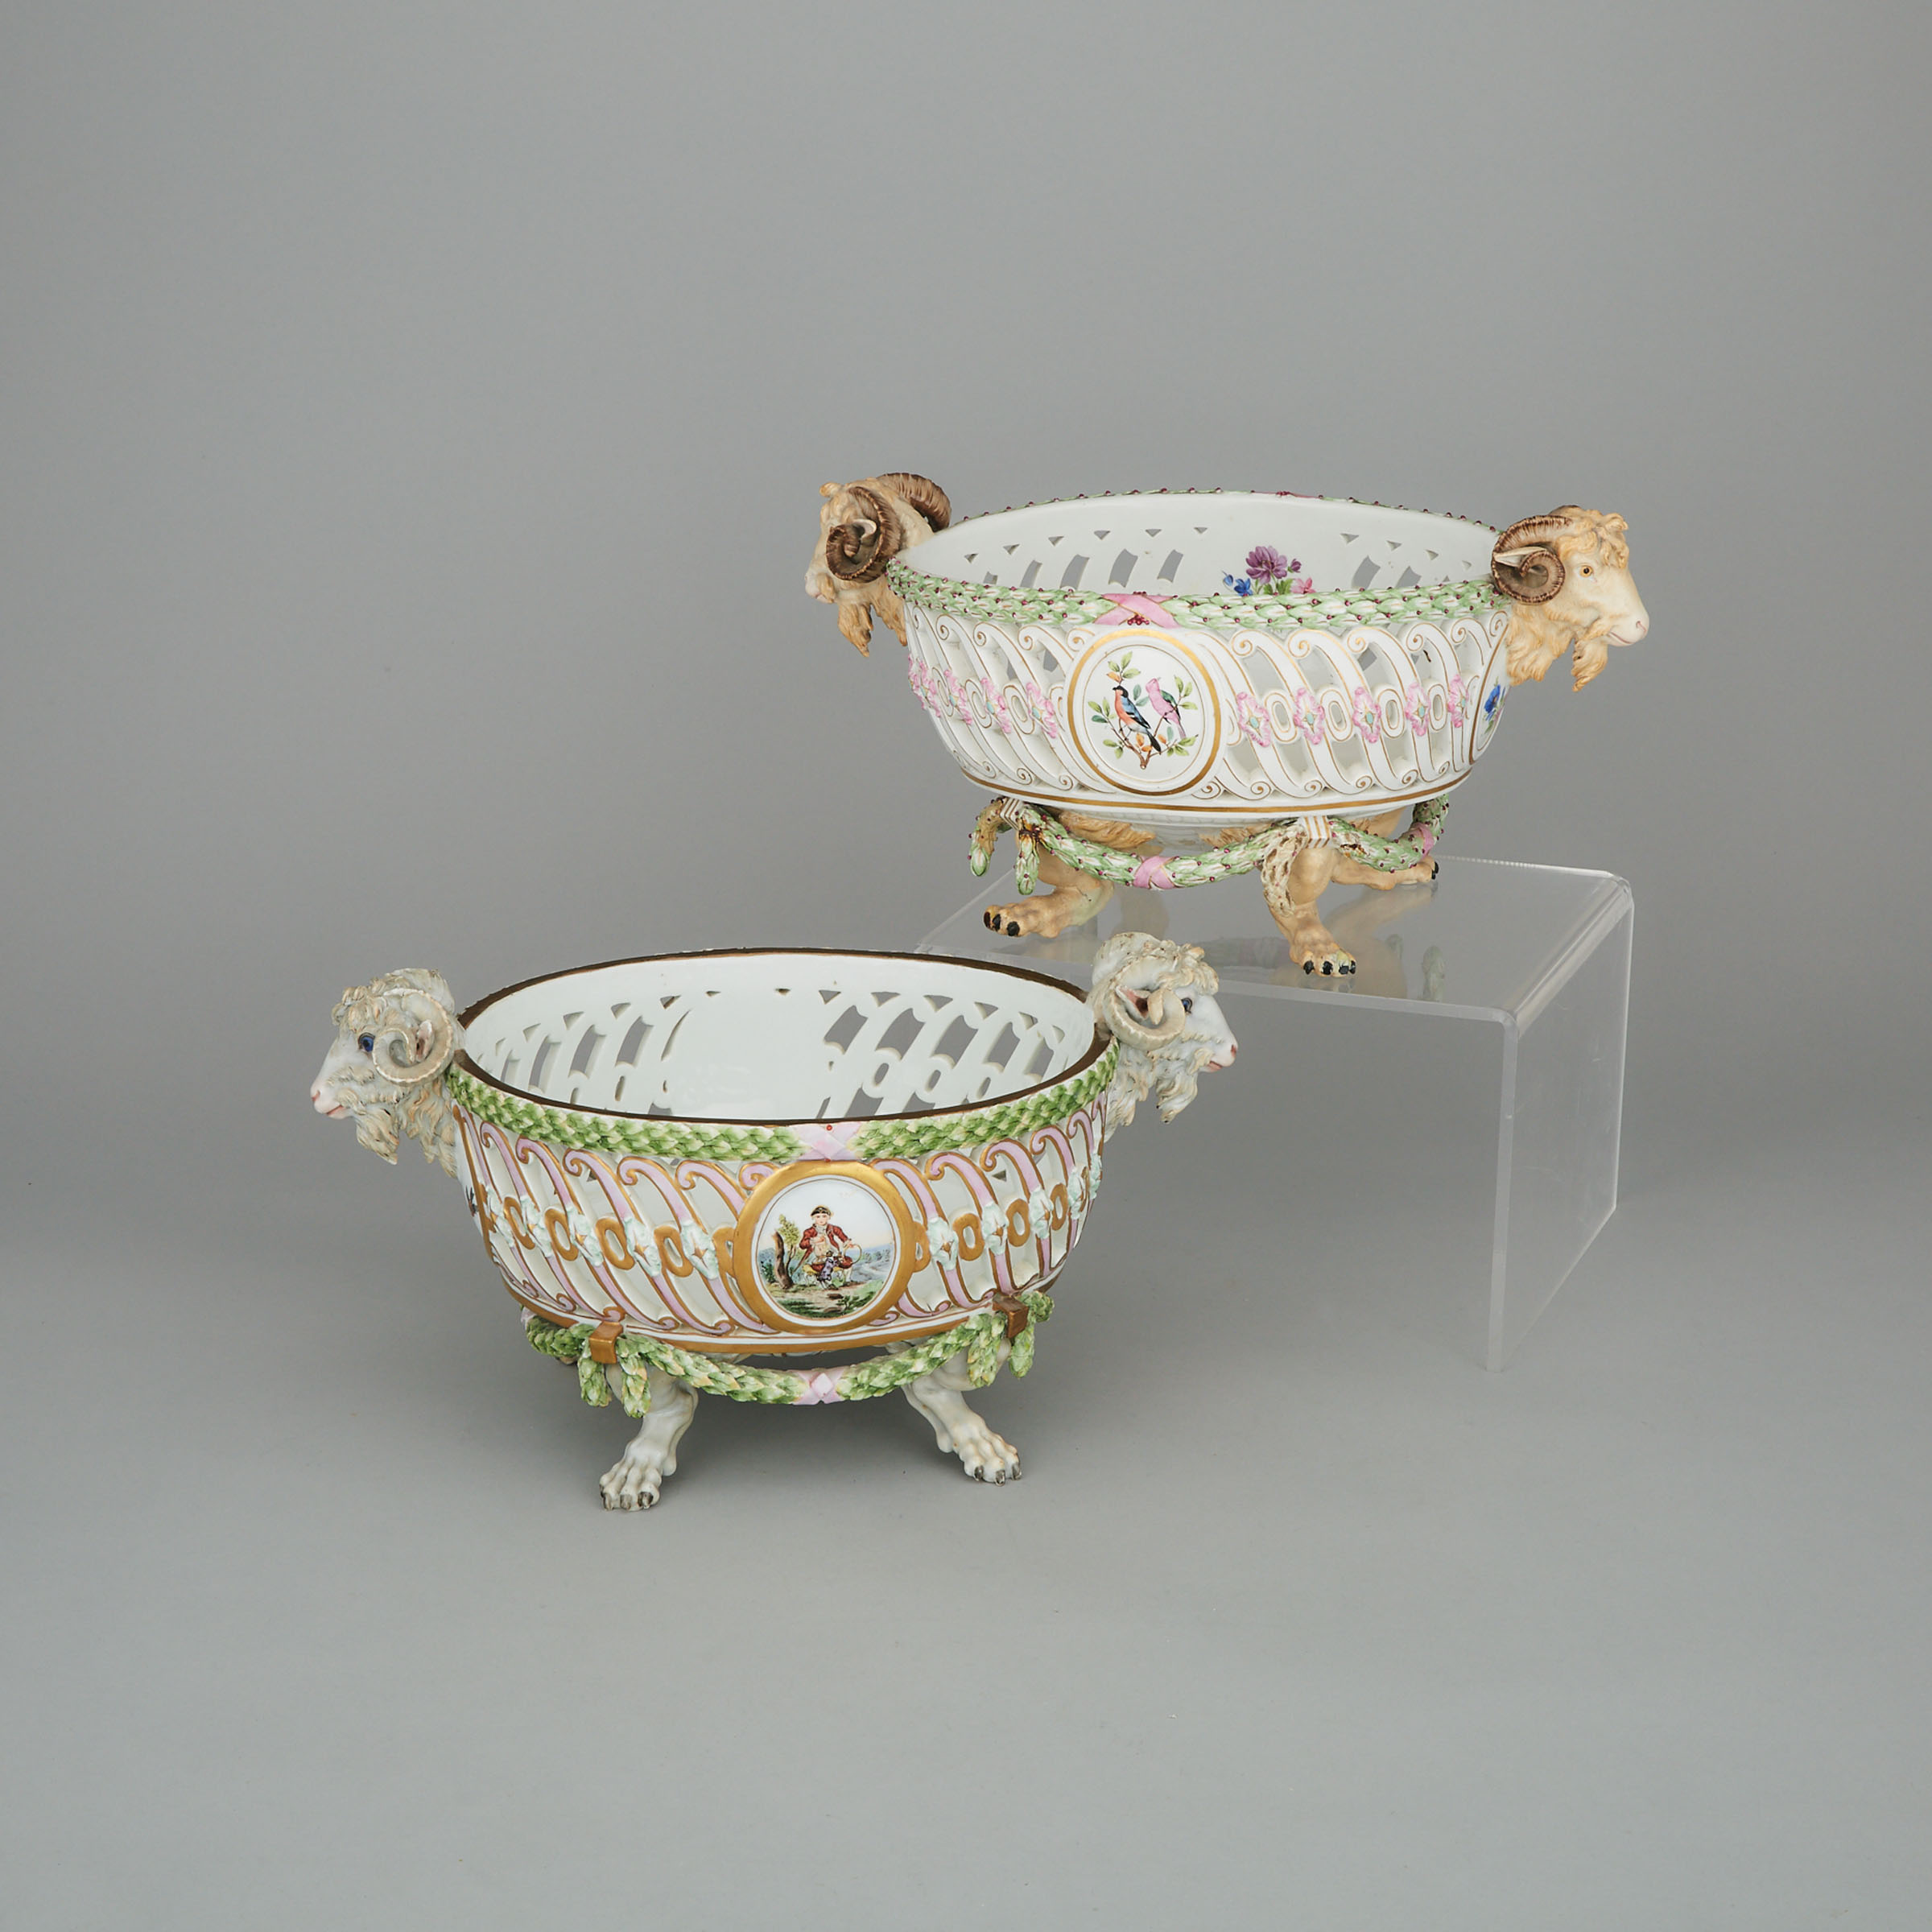 Two 'Meissen' Two-Handled Pierced Oval Baskets, late 19th century